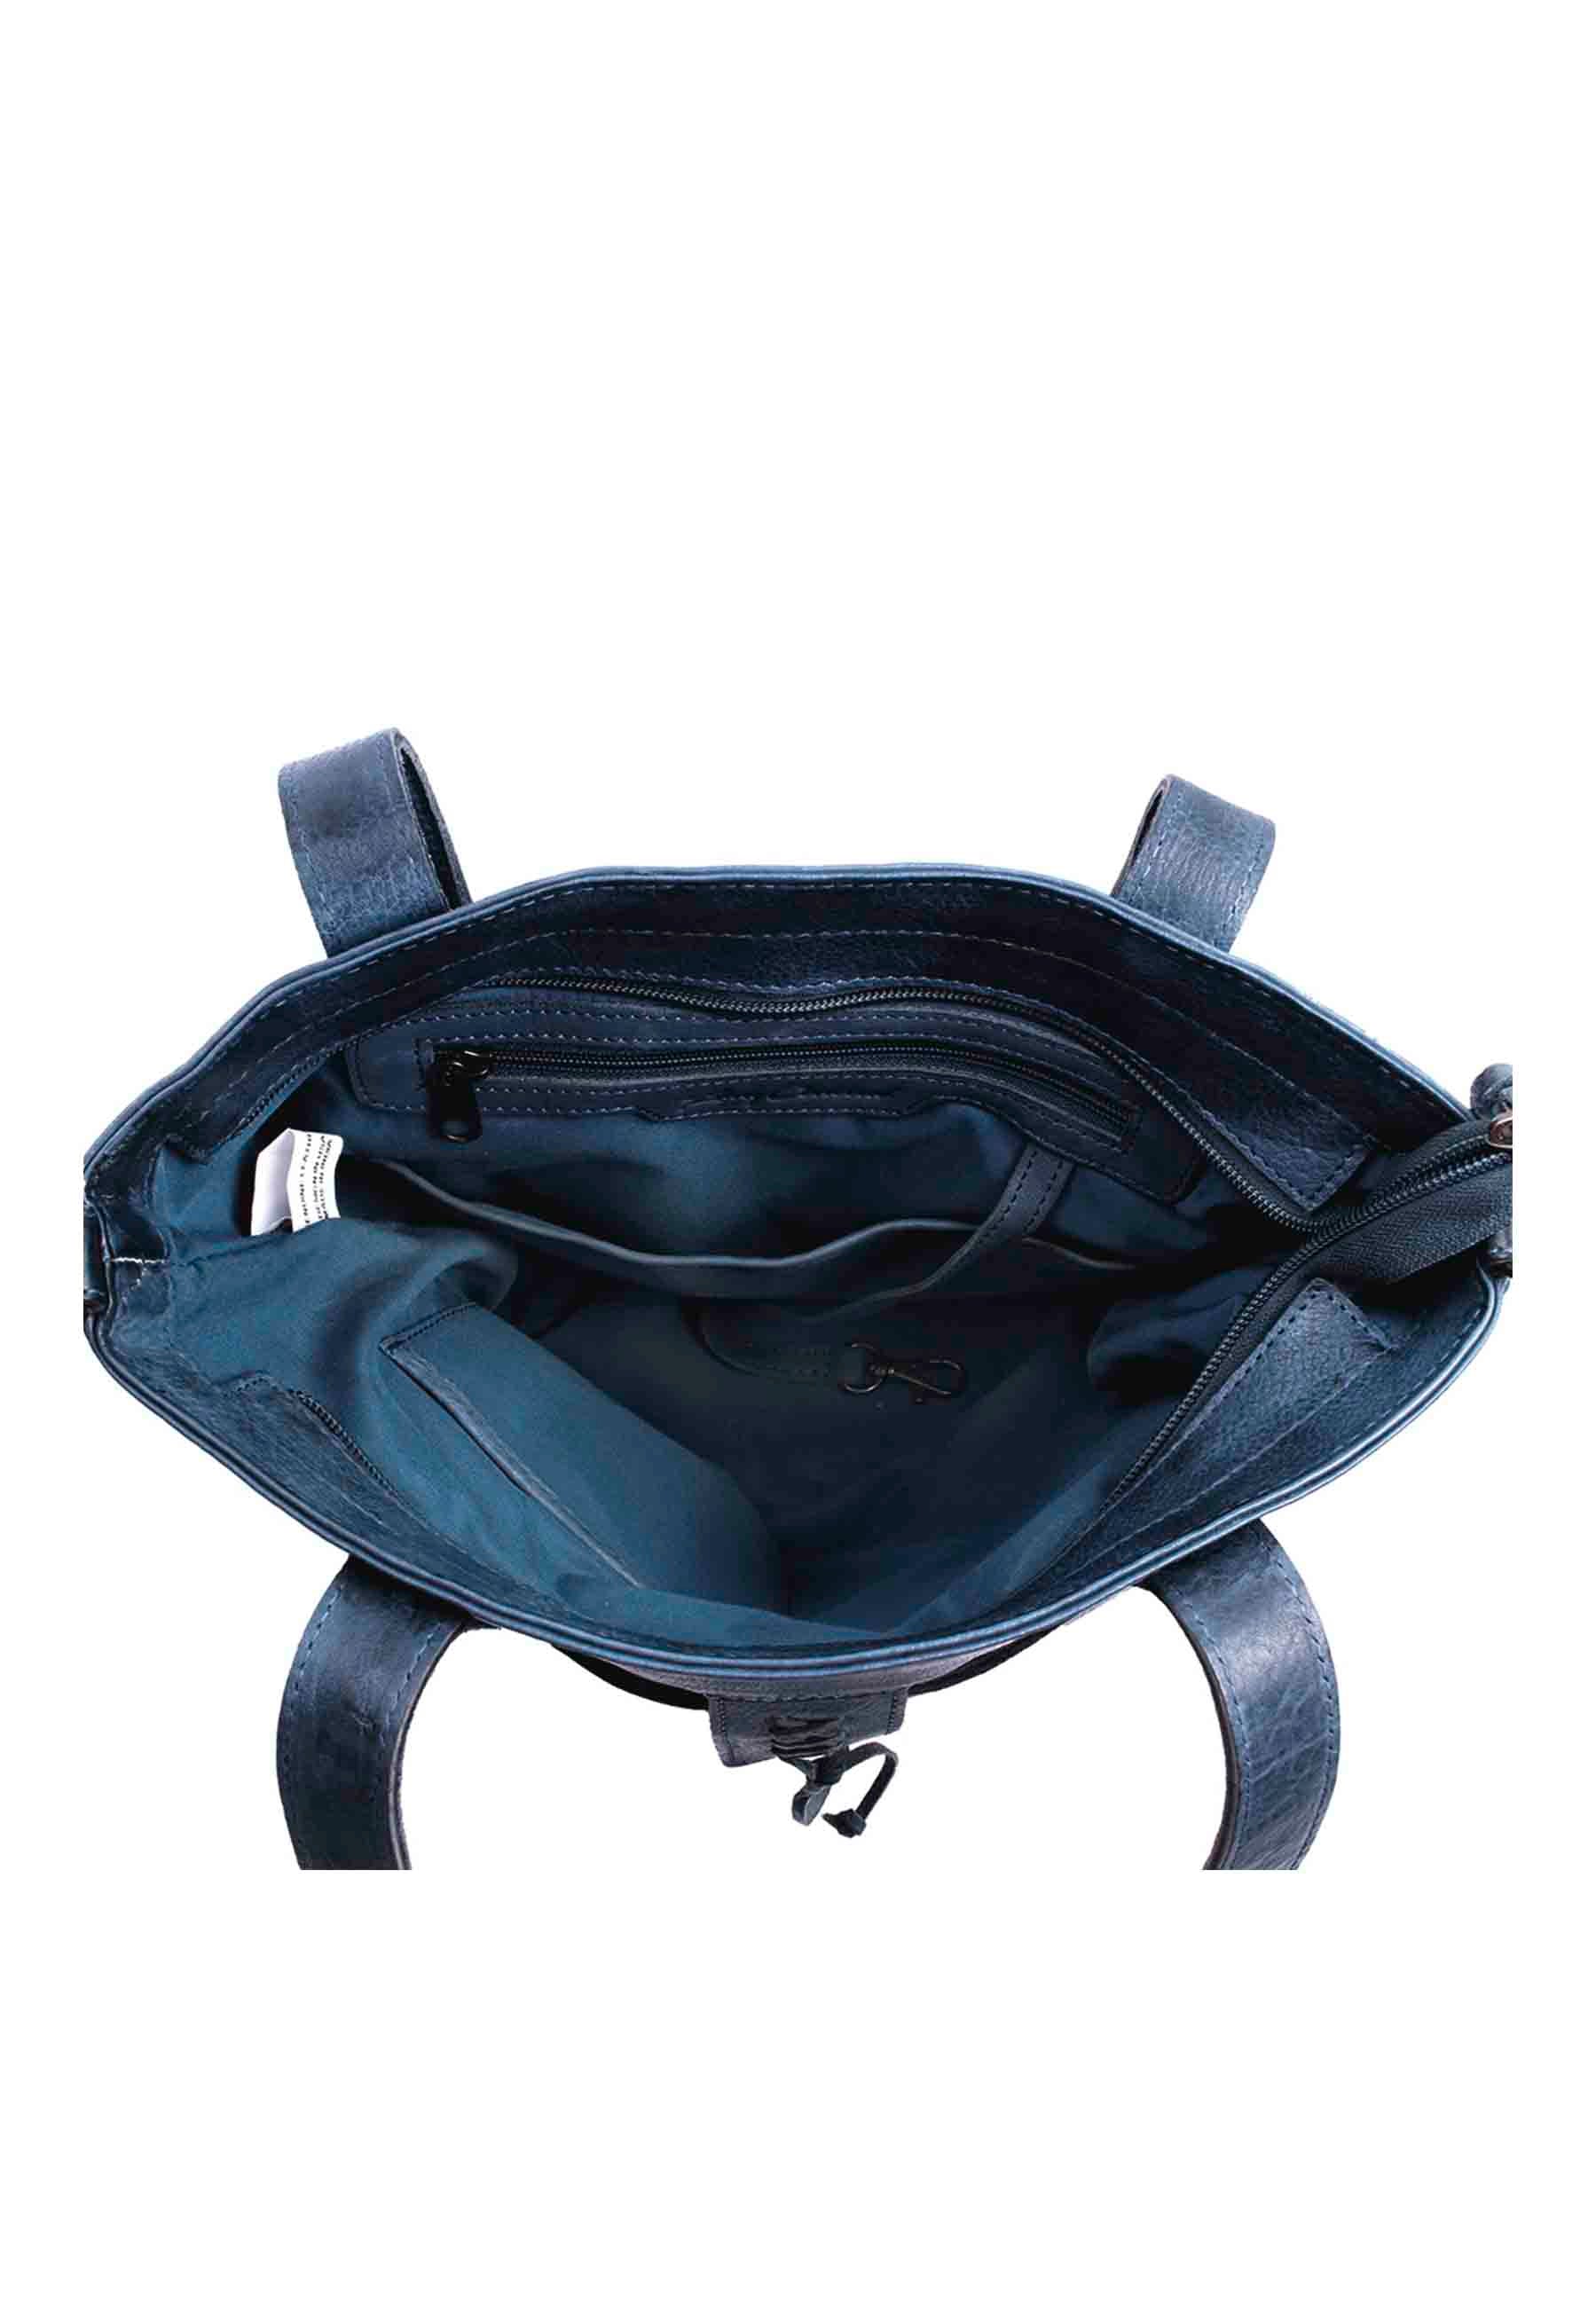 exploded interior view of leather pistol bag in blue